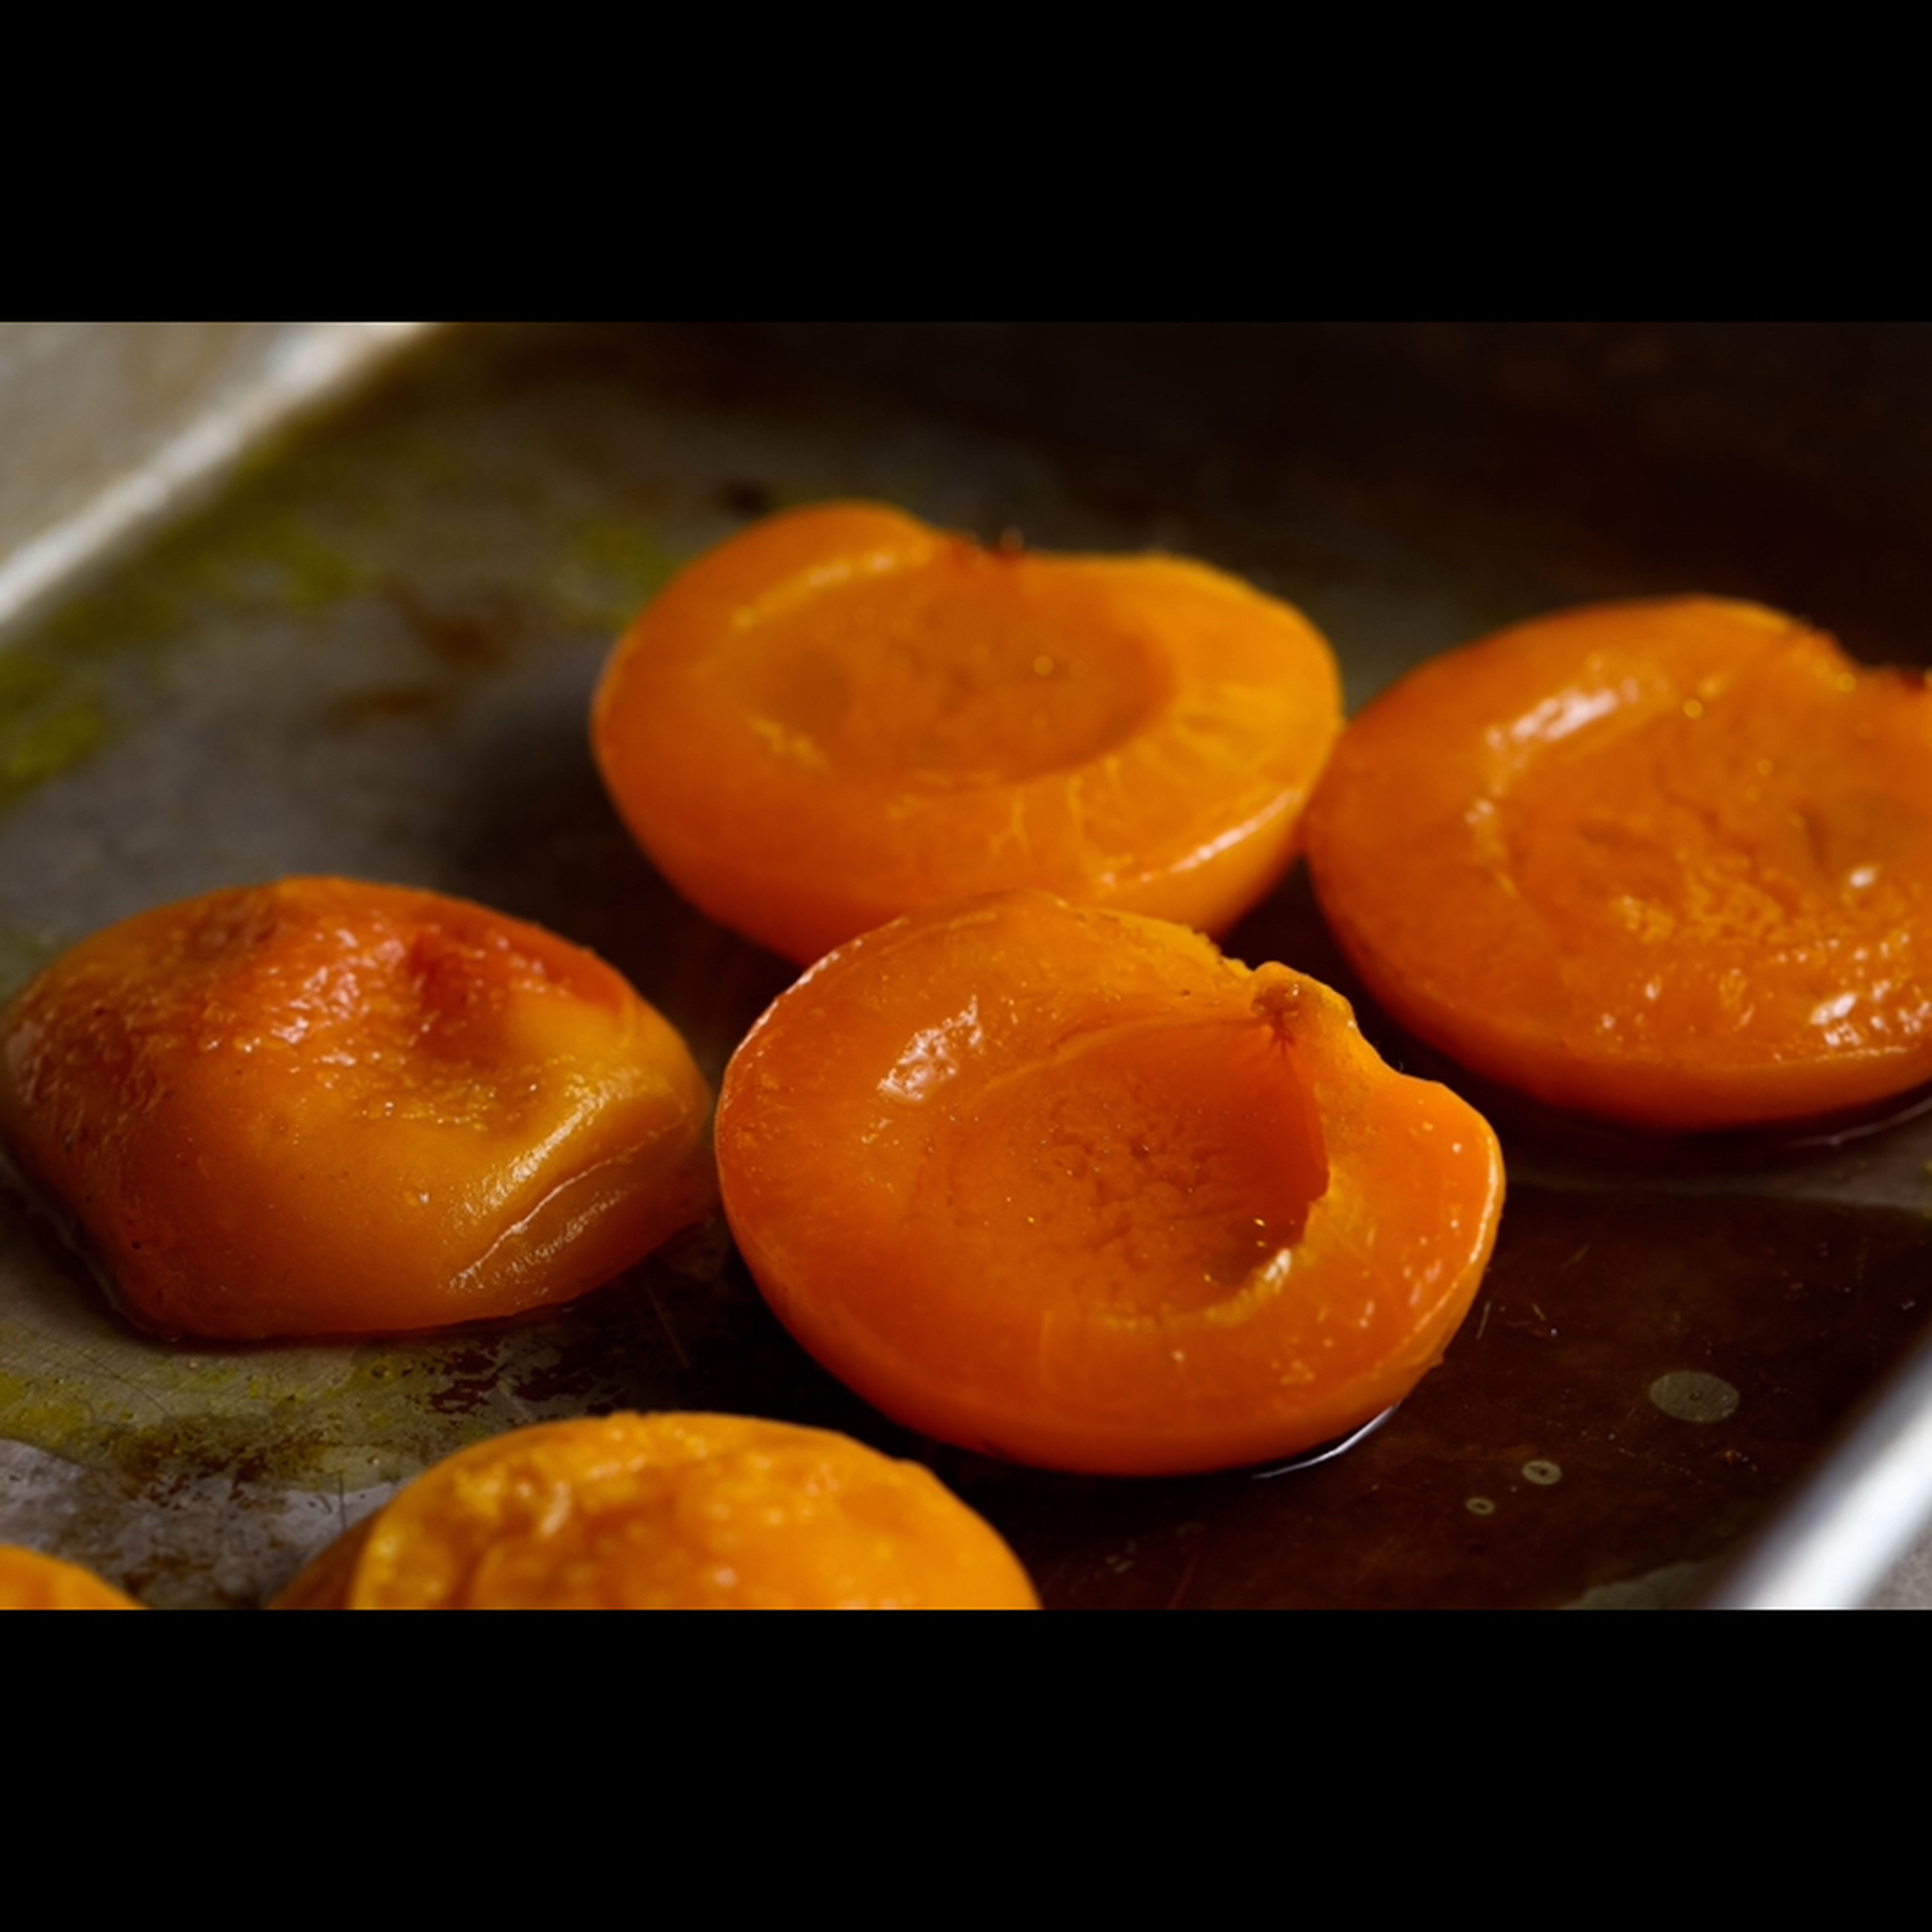 Preheat oven to 425F. Halve the apricots and remove the pits. Place them in a baking pan and drizzle with oil. Roast for 7-10min, or until softened.